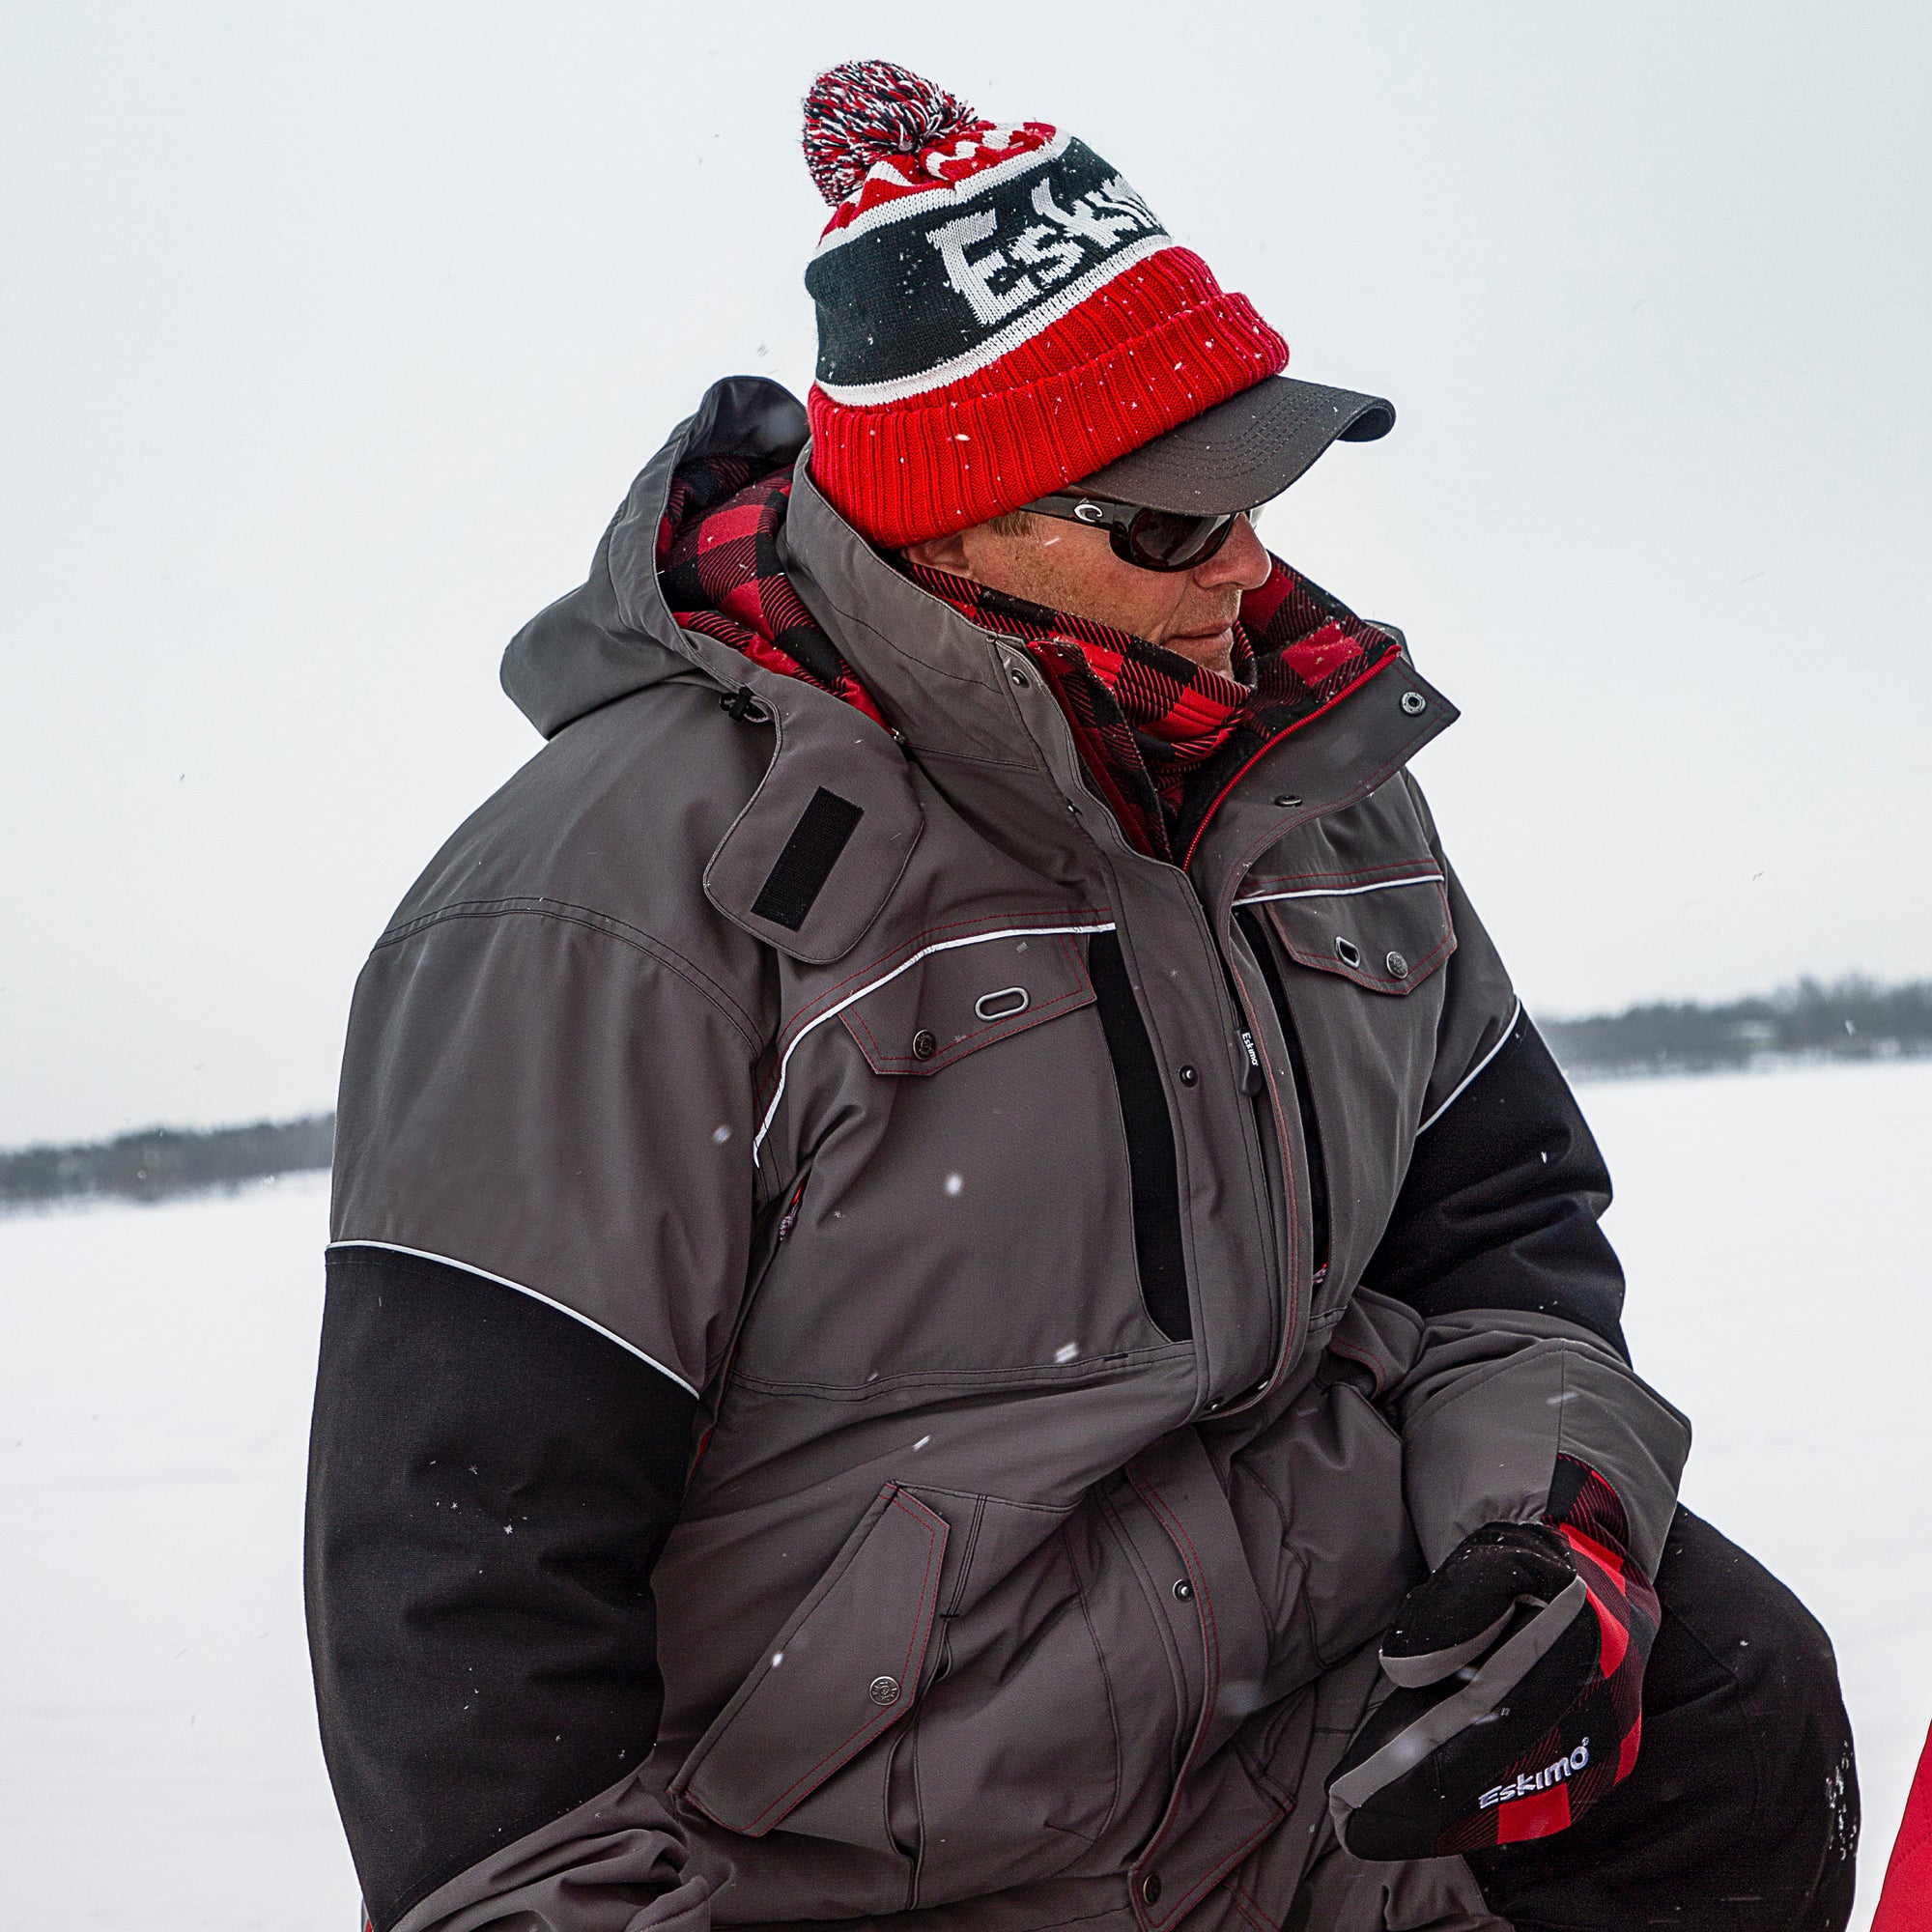 eskimo ice fishing apparel Offers online OFF 67%